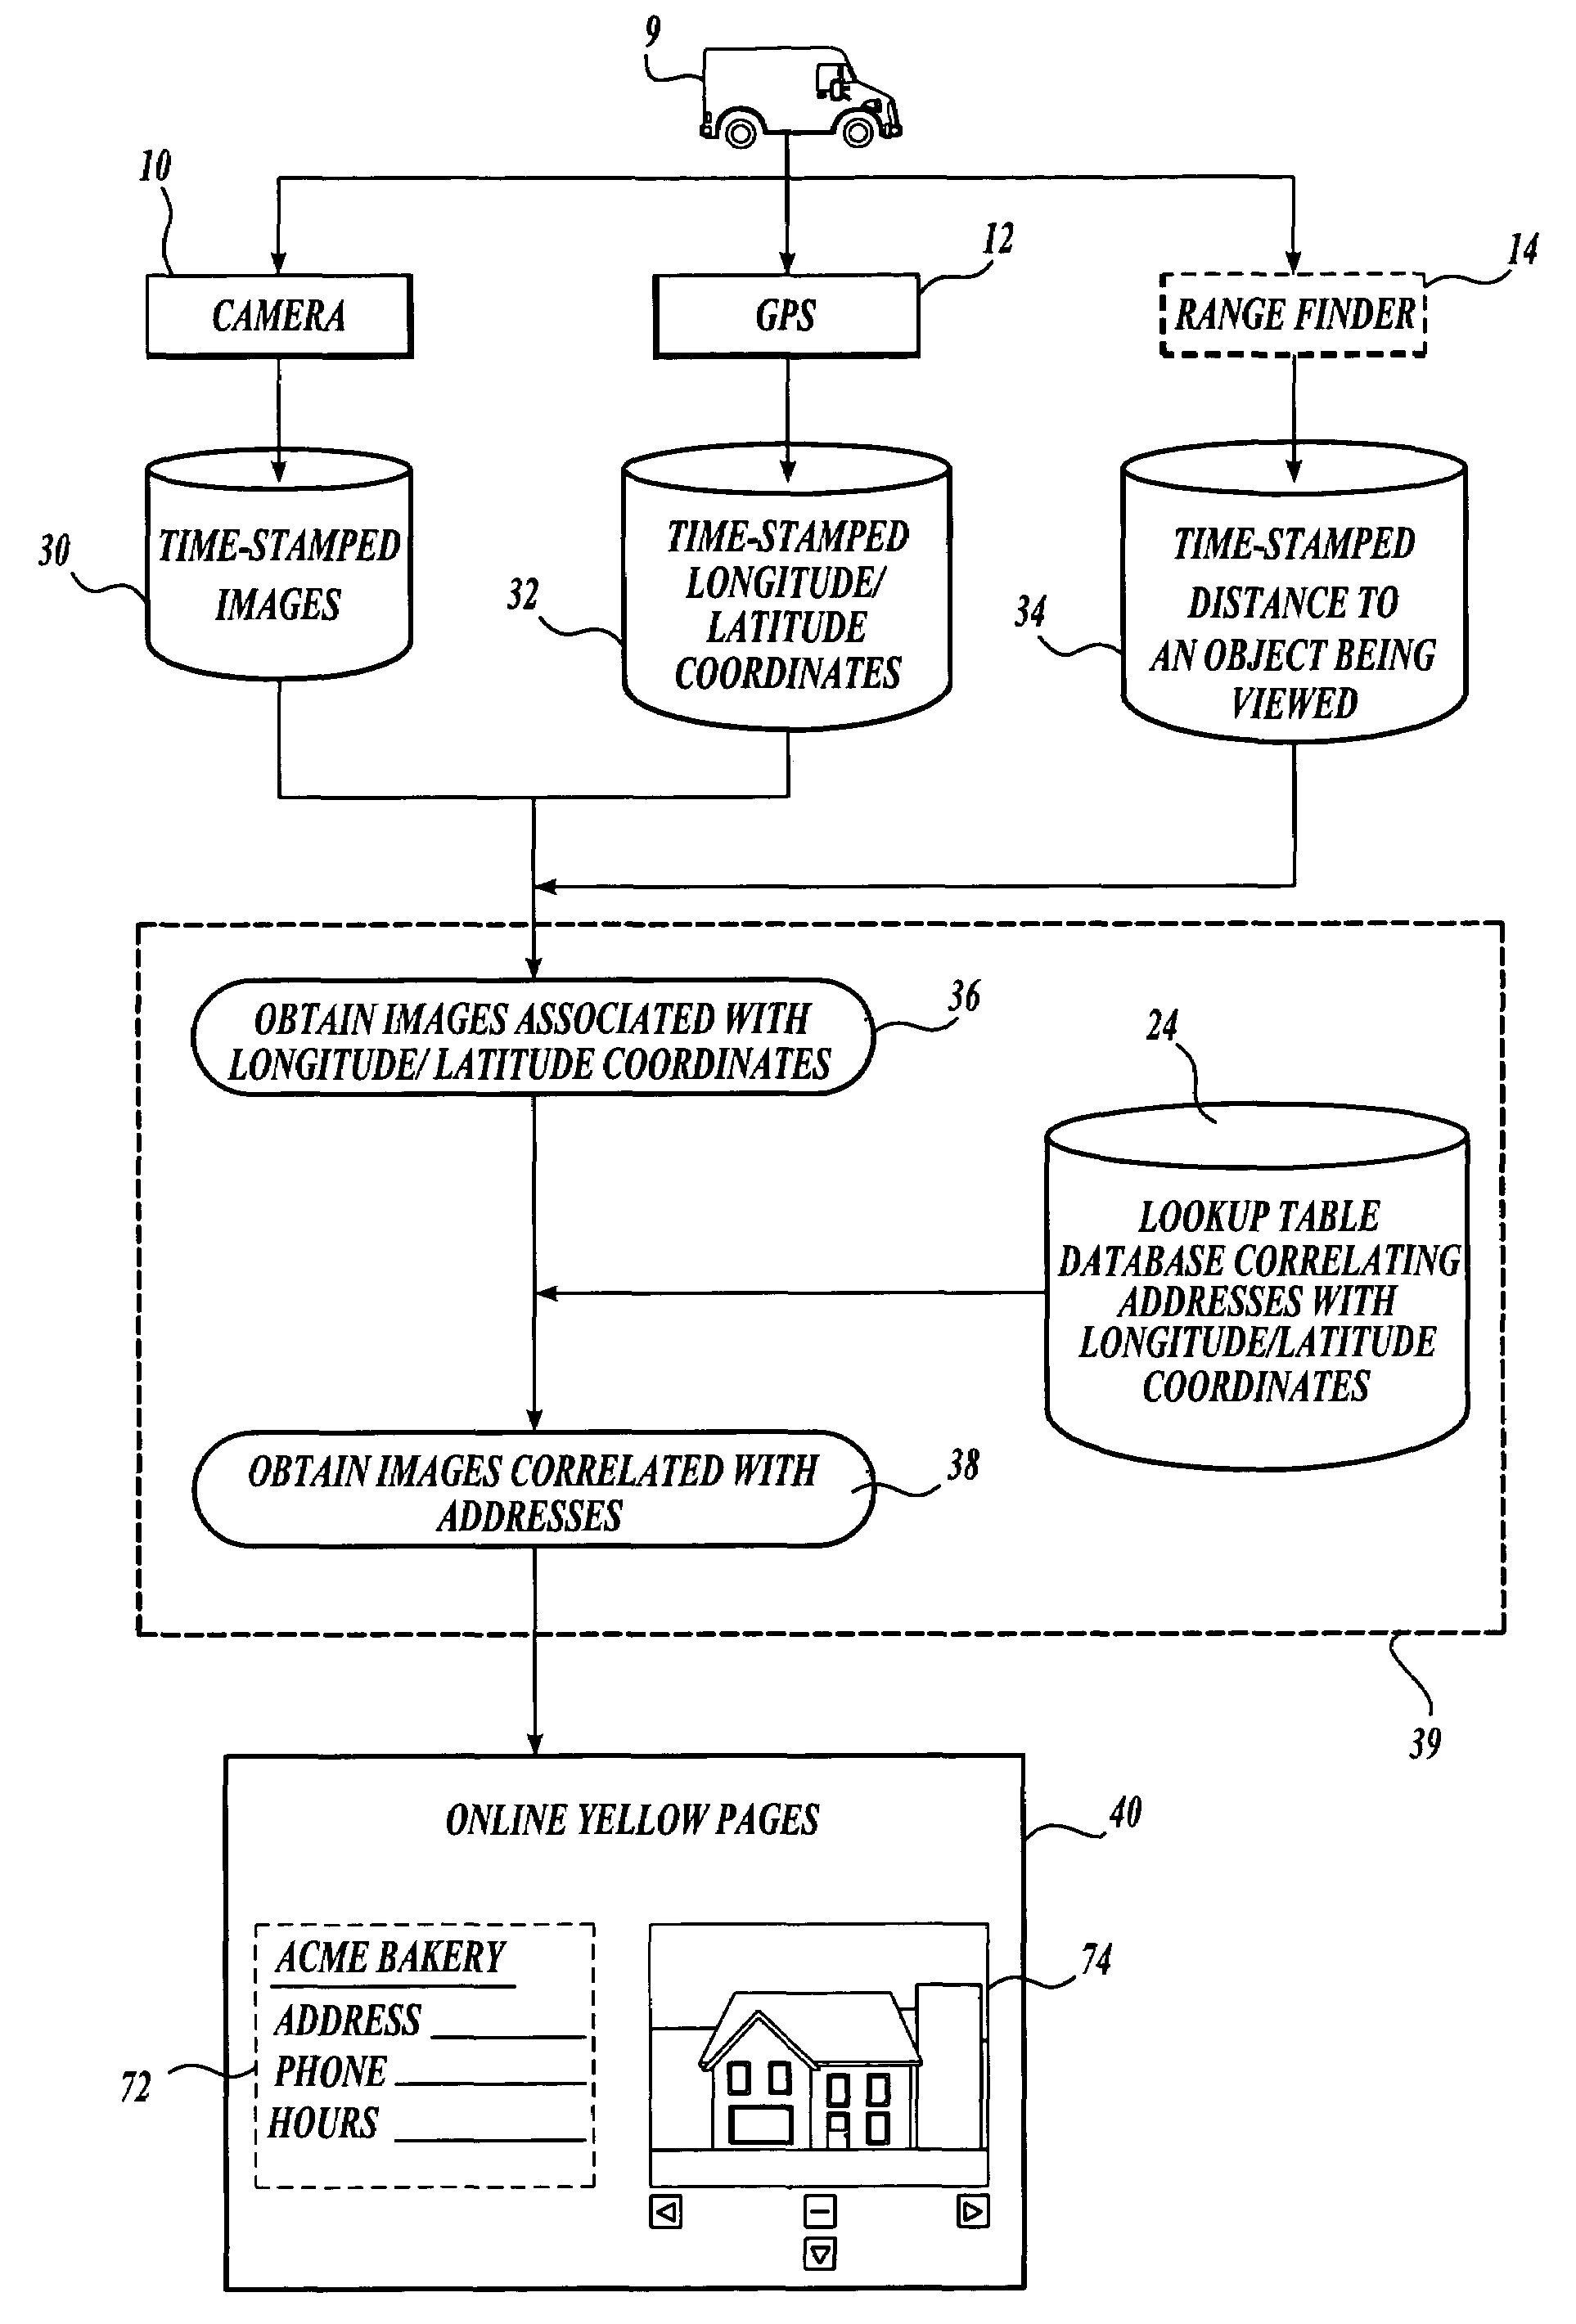 System and method for automatically collecting images of objects at geographic locations and displaying same in online directories